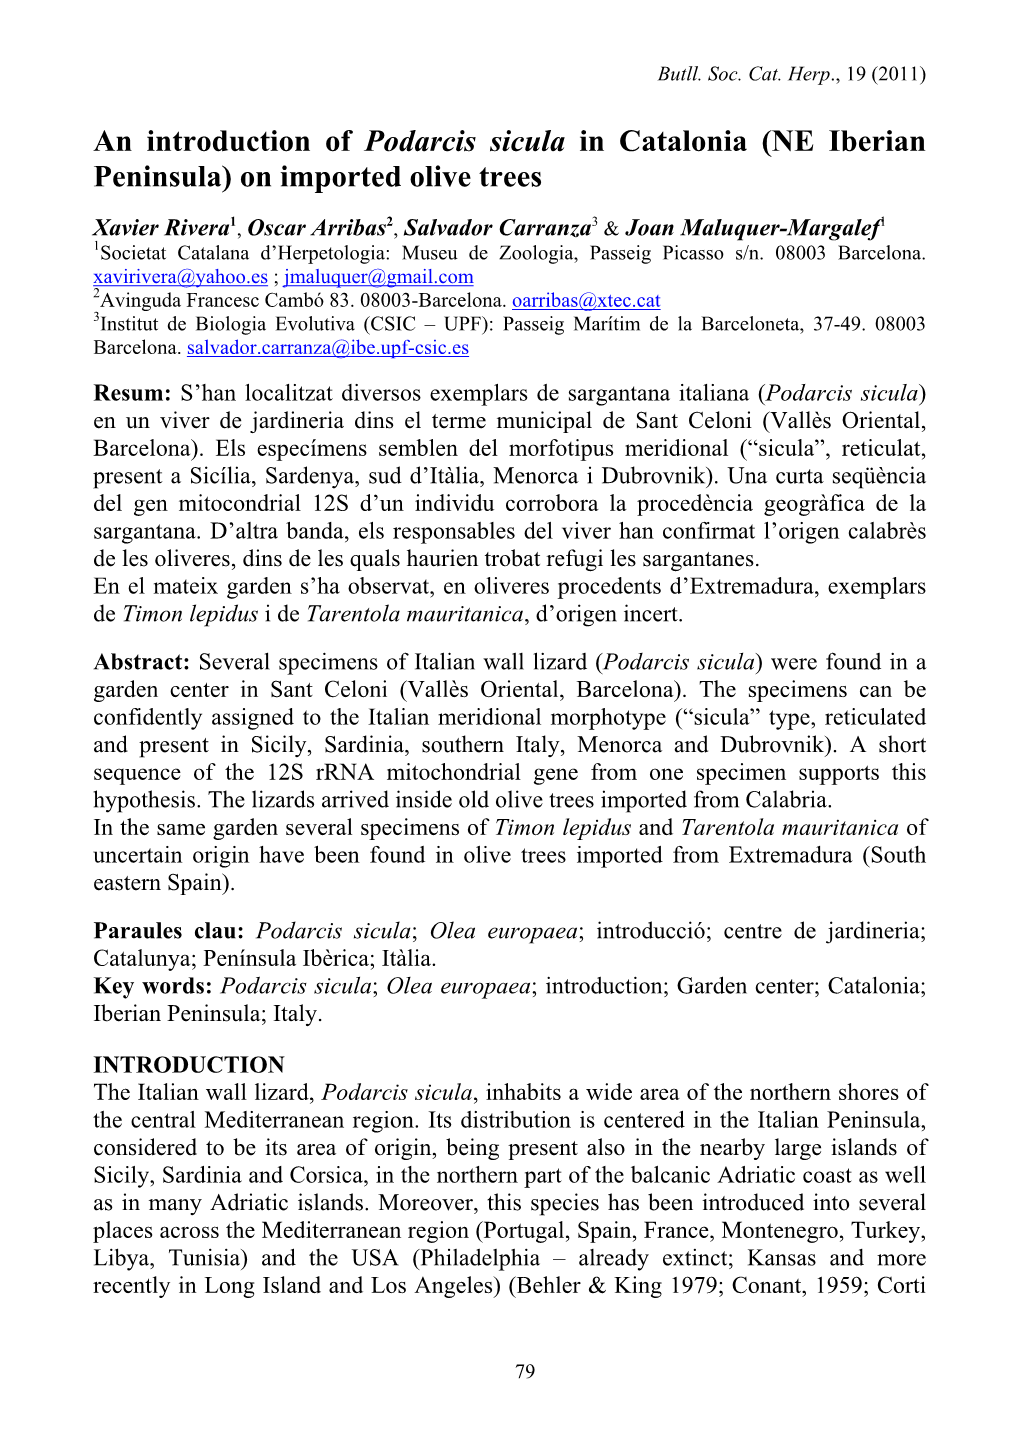 An Introduction of Podarcis Sicula in Catalonia (NE Iberian Peninsula) on Imported Olive Trees